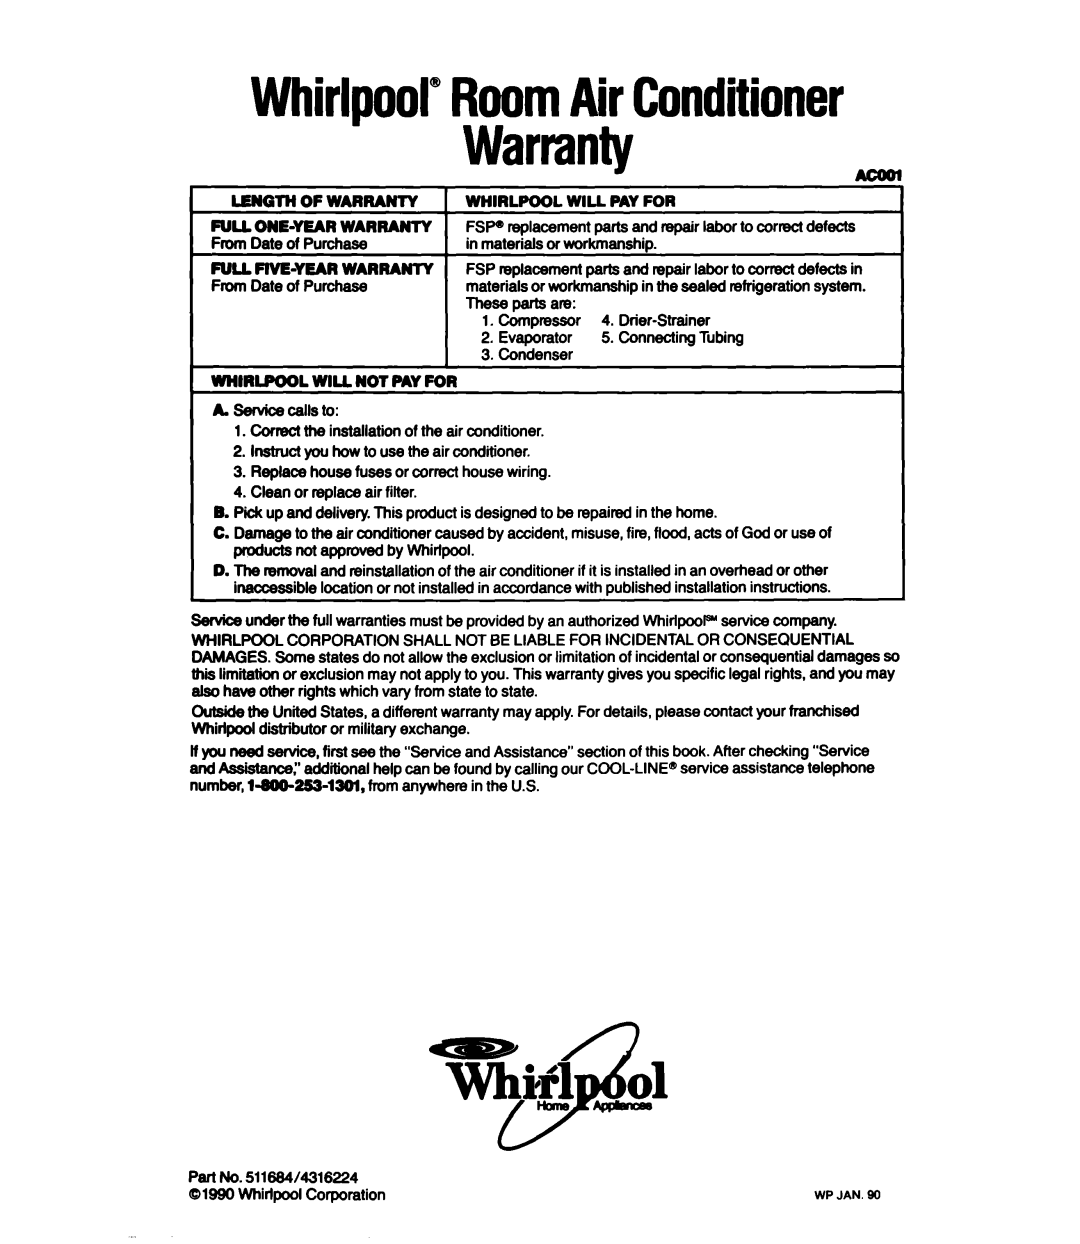 Whirlpool ACS802, ACSLOP, ACS602, ACC602 manual Whirlpool”RoomAir Conditioner Warranty 